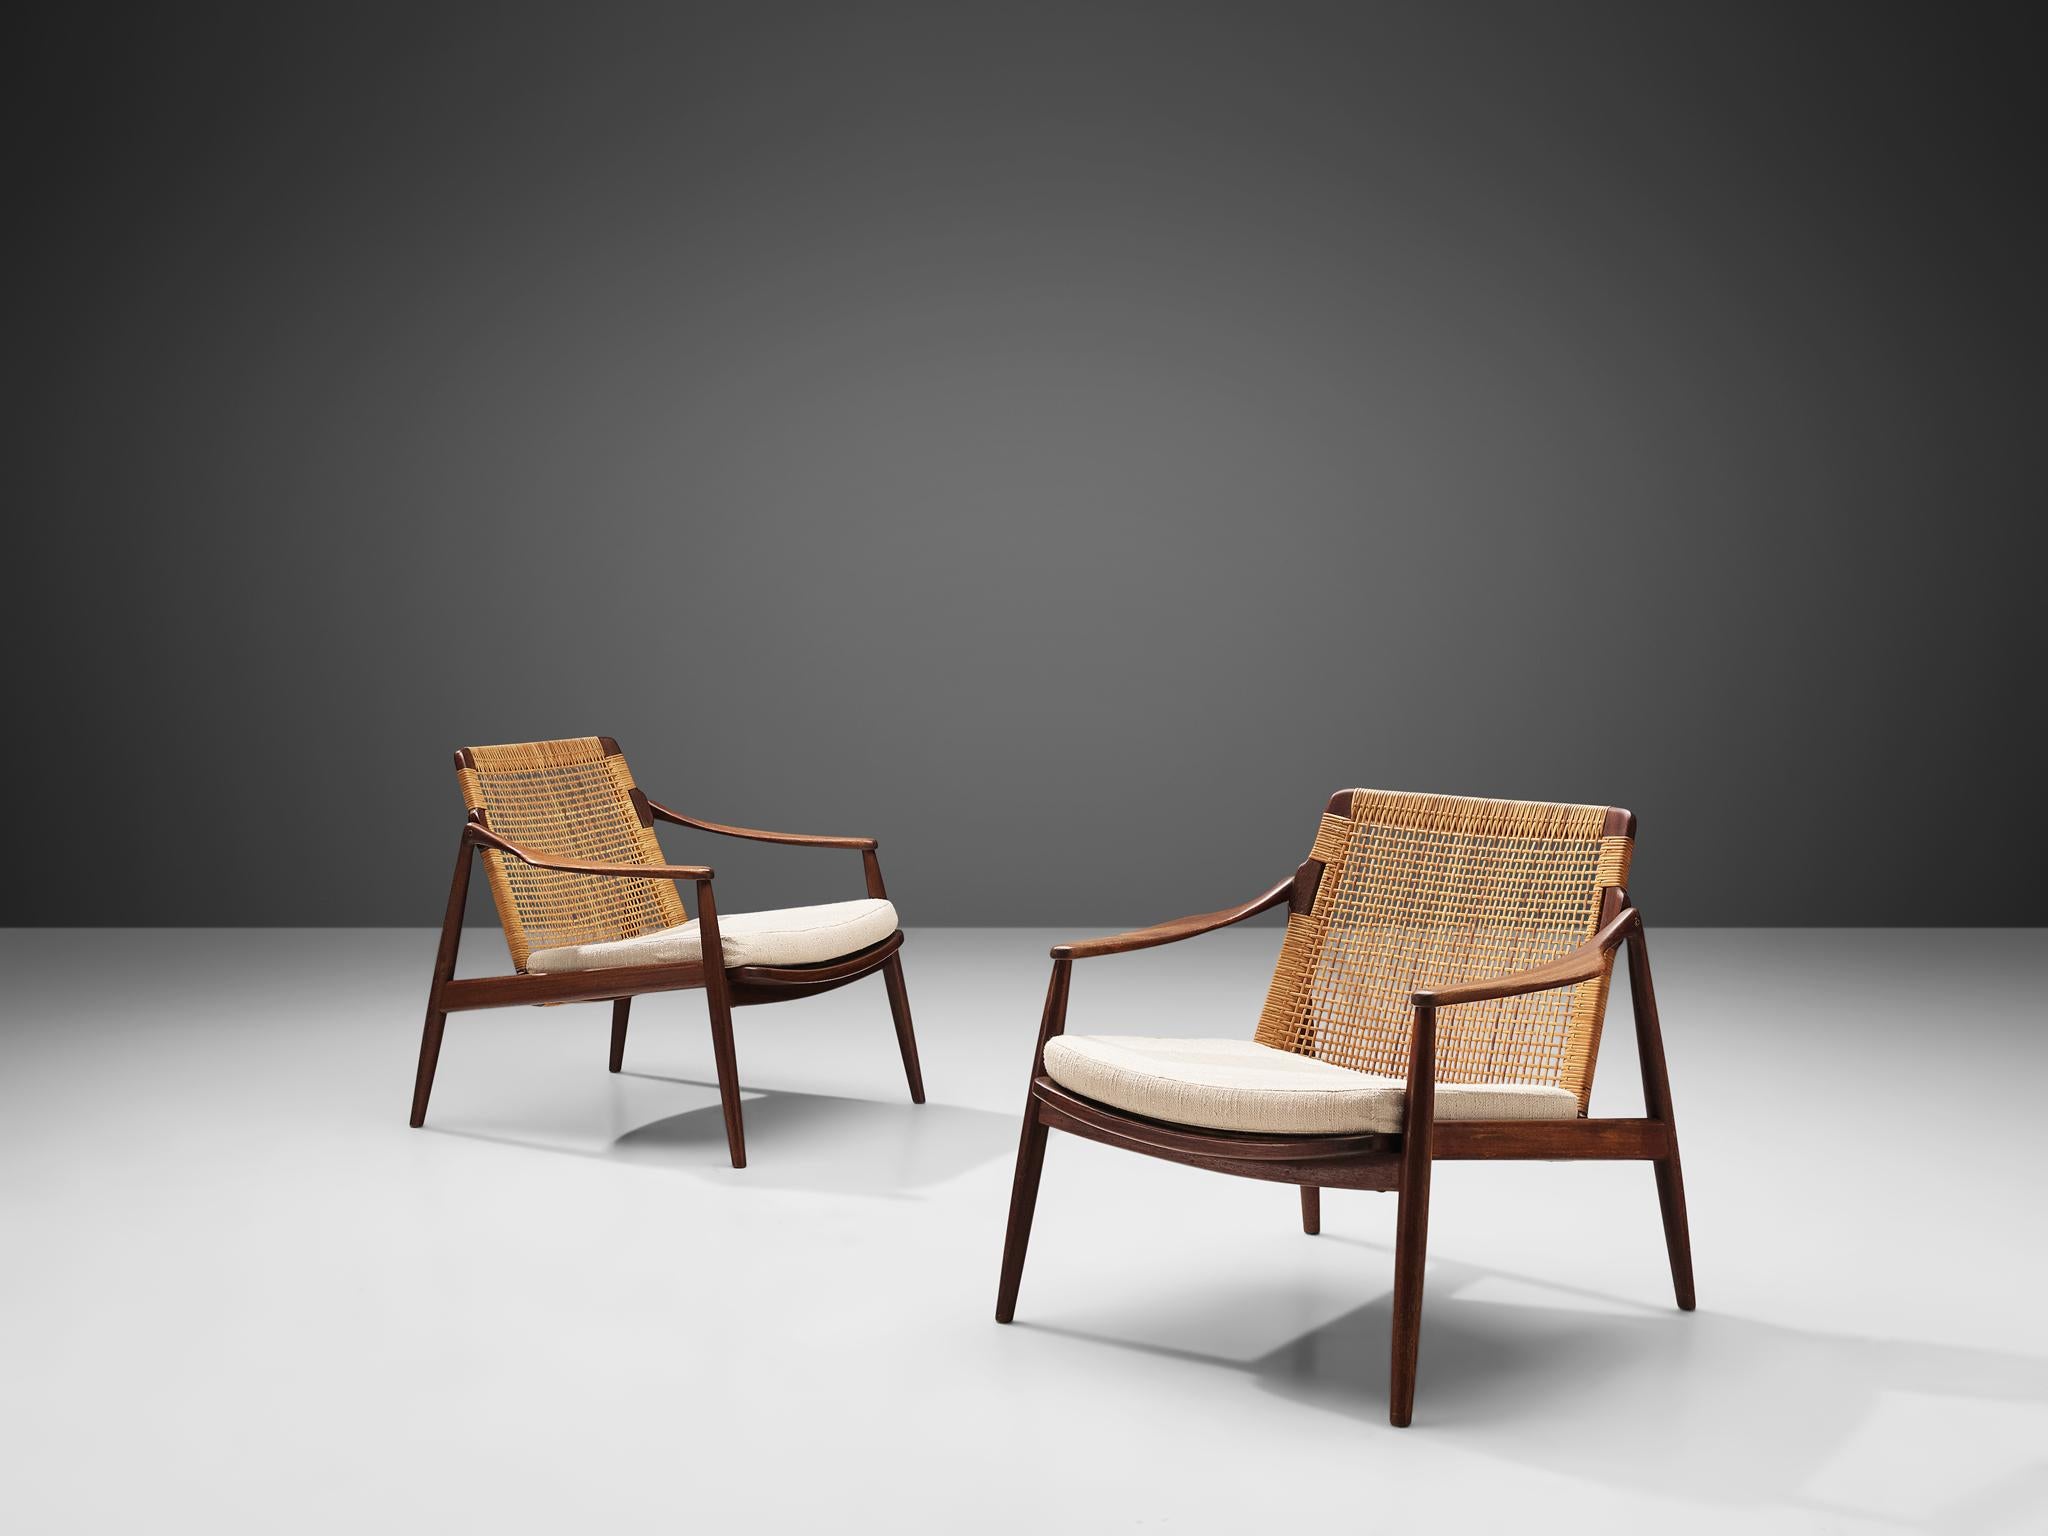 Hartmut Lohmeyer for Wilkhahn, armchairs, teak, cane, cream colored upholstery, Germany, 1960s.

This low reclining armchair is sensuous and is organically shaped. They feature a slightly tilted back and are executed with tapered legs. The softly